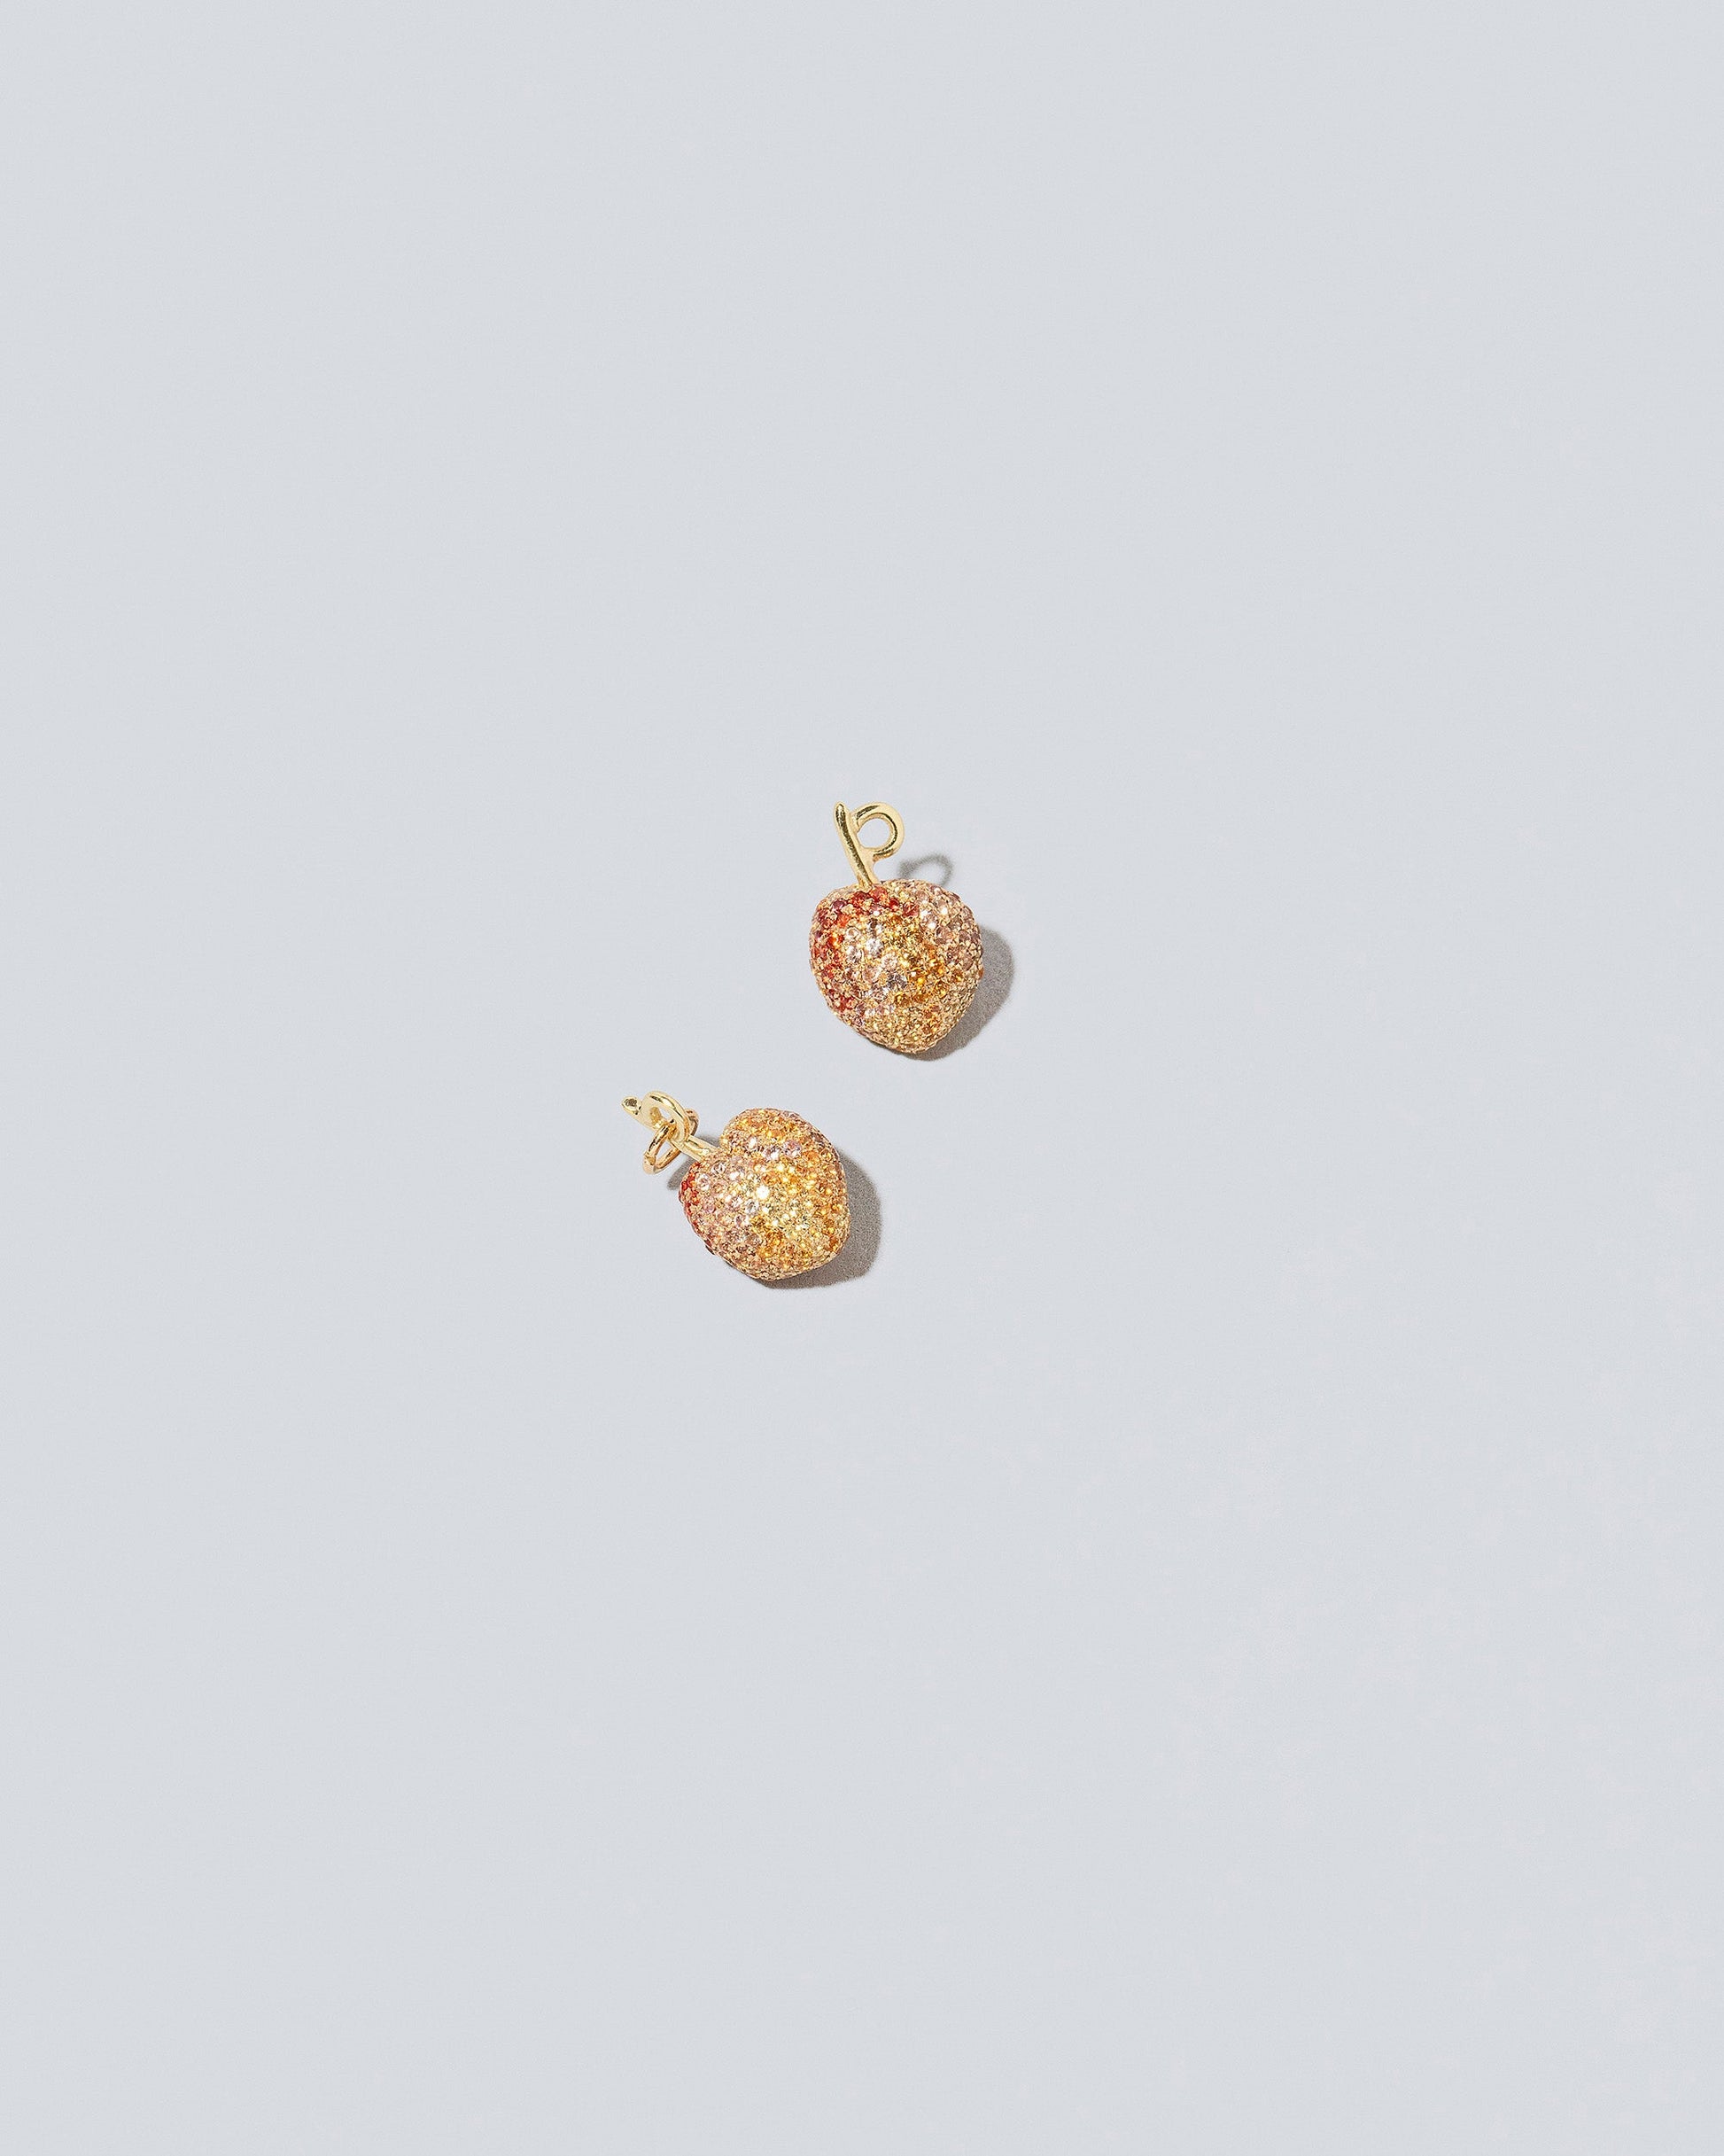  Peach Charms on light color background.